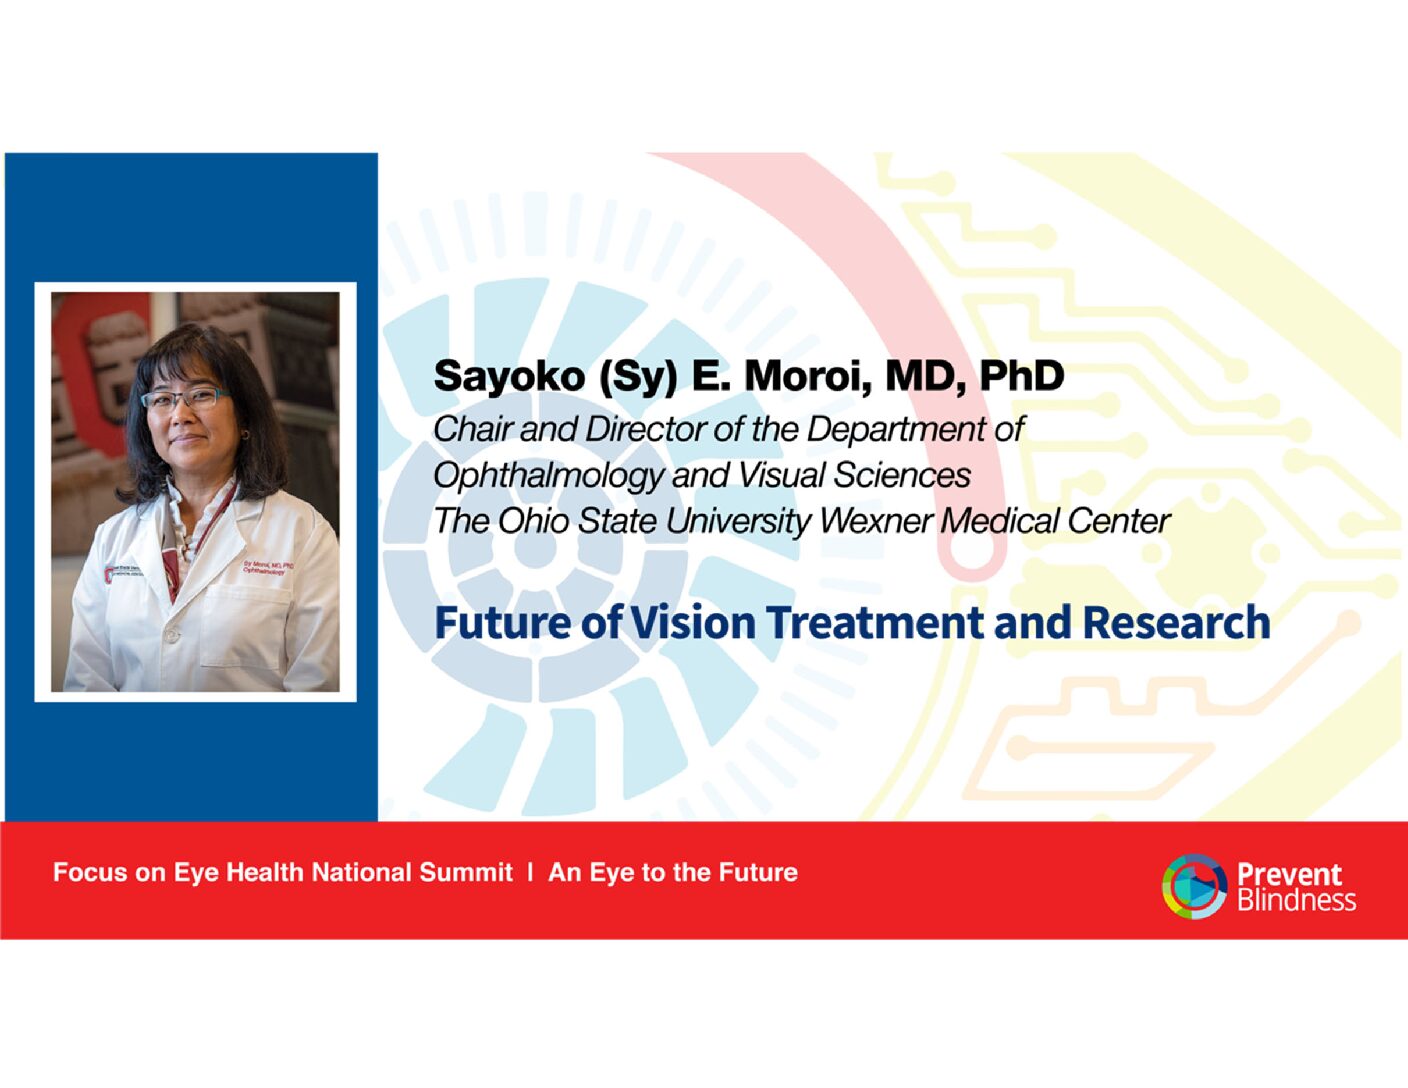 Future of Vision Treatment and Research